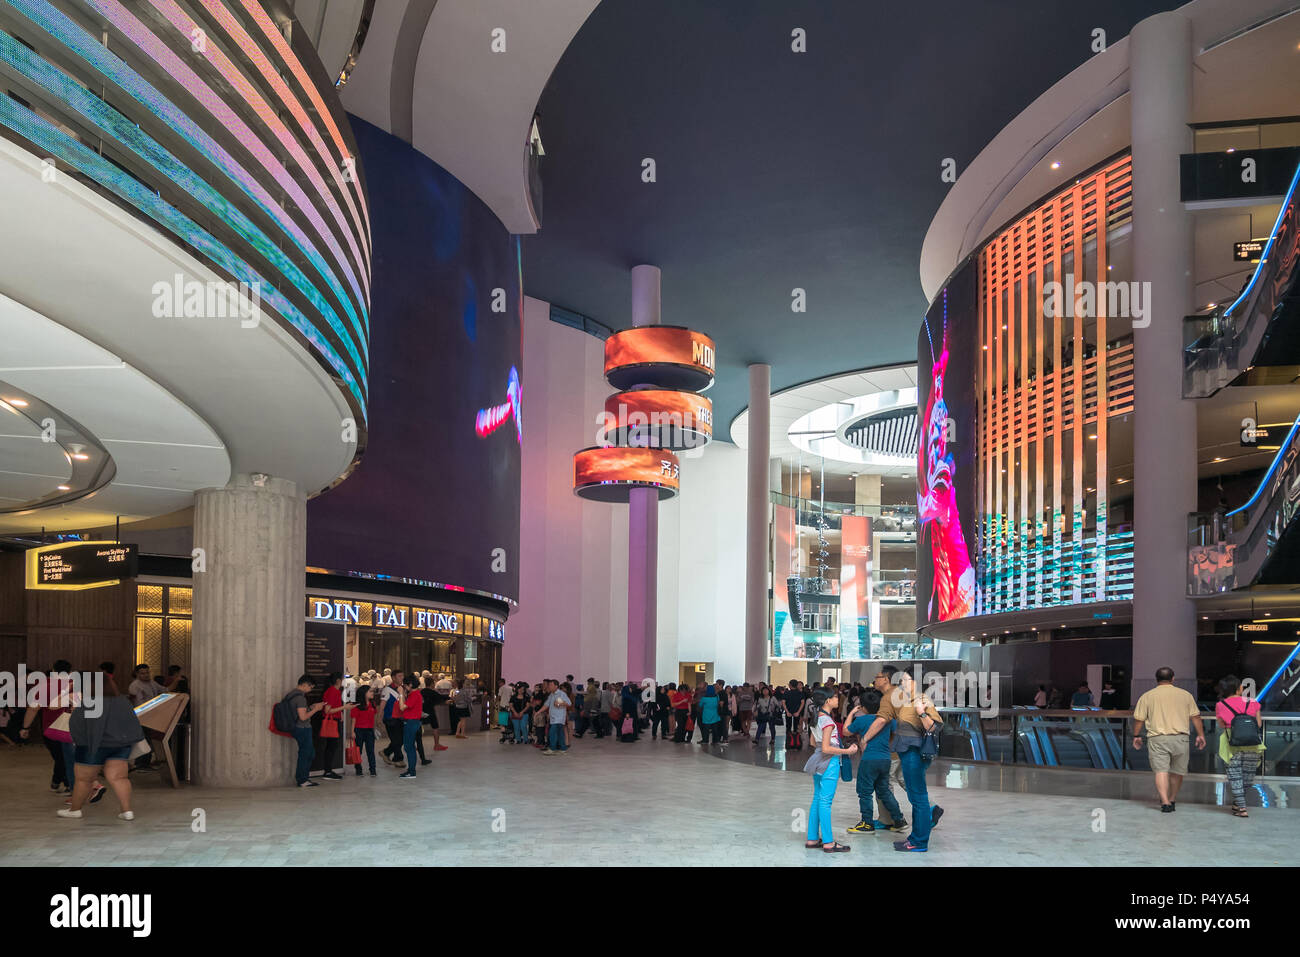 Genting Highlands, Malaysia - Oct 18,2017 : SkyAvenue is a new shopping mall with LED display that spreads across an entire atrium within the mall. Stock Photo